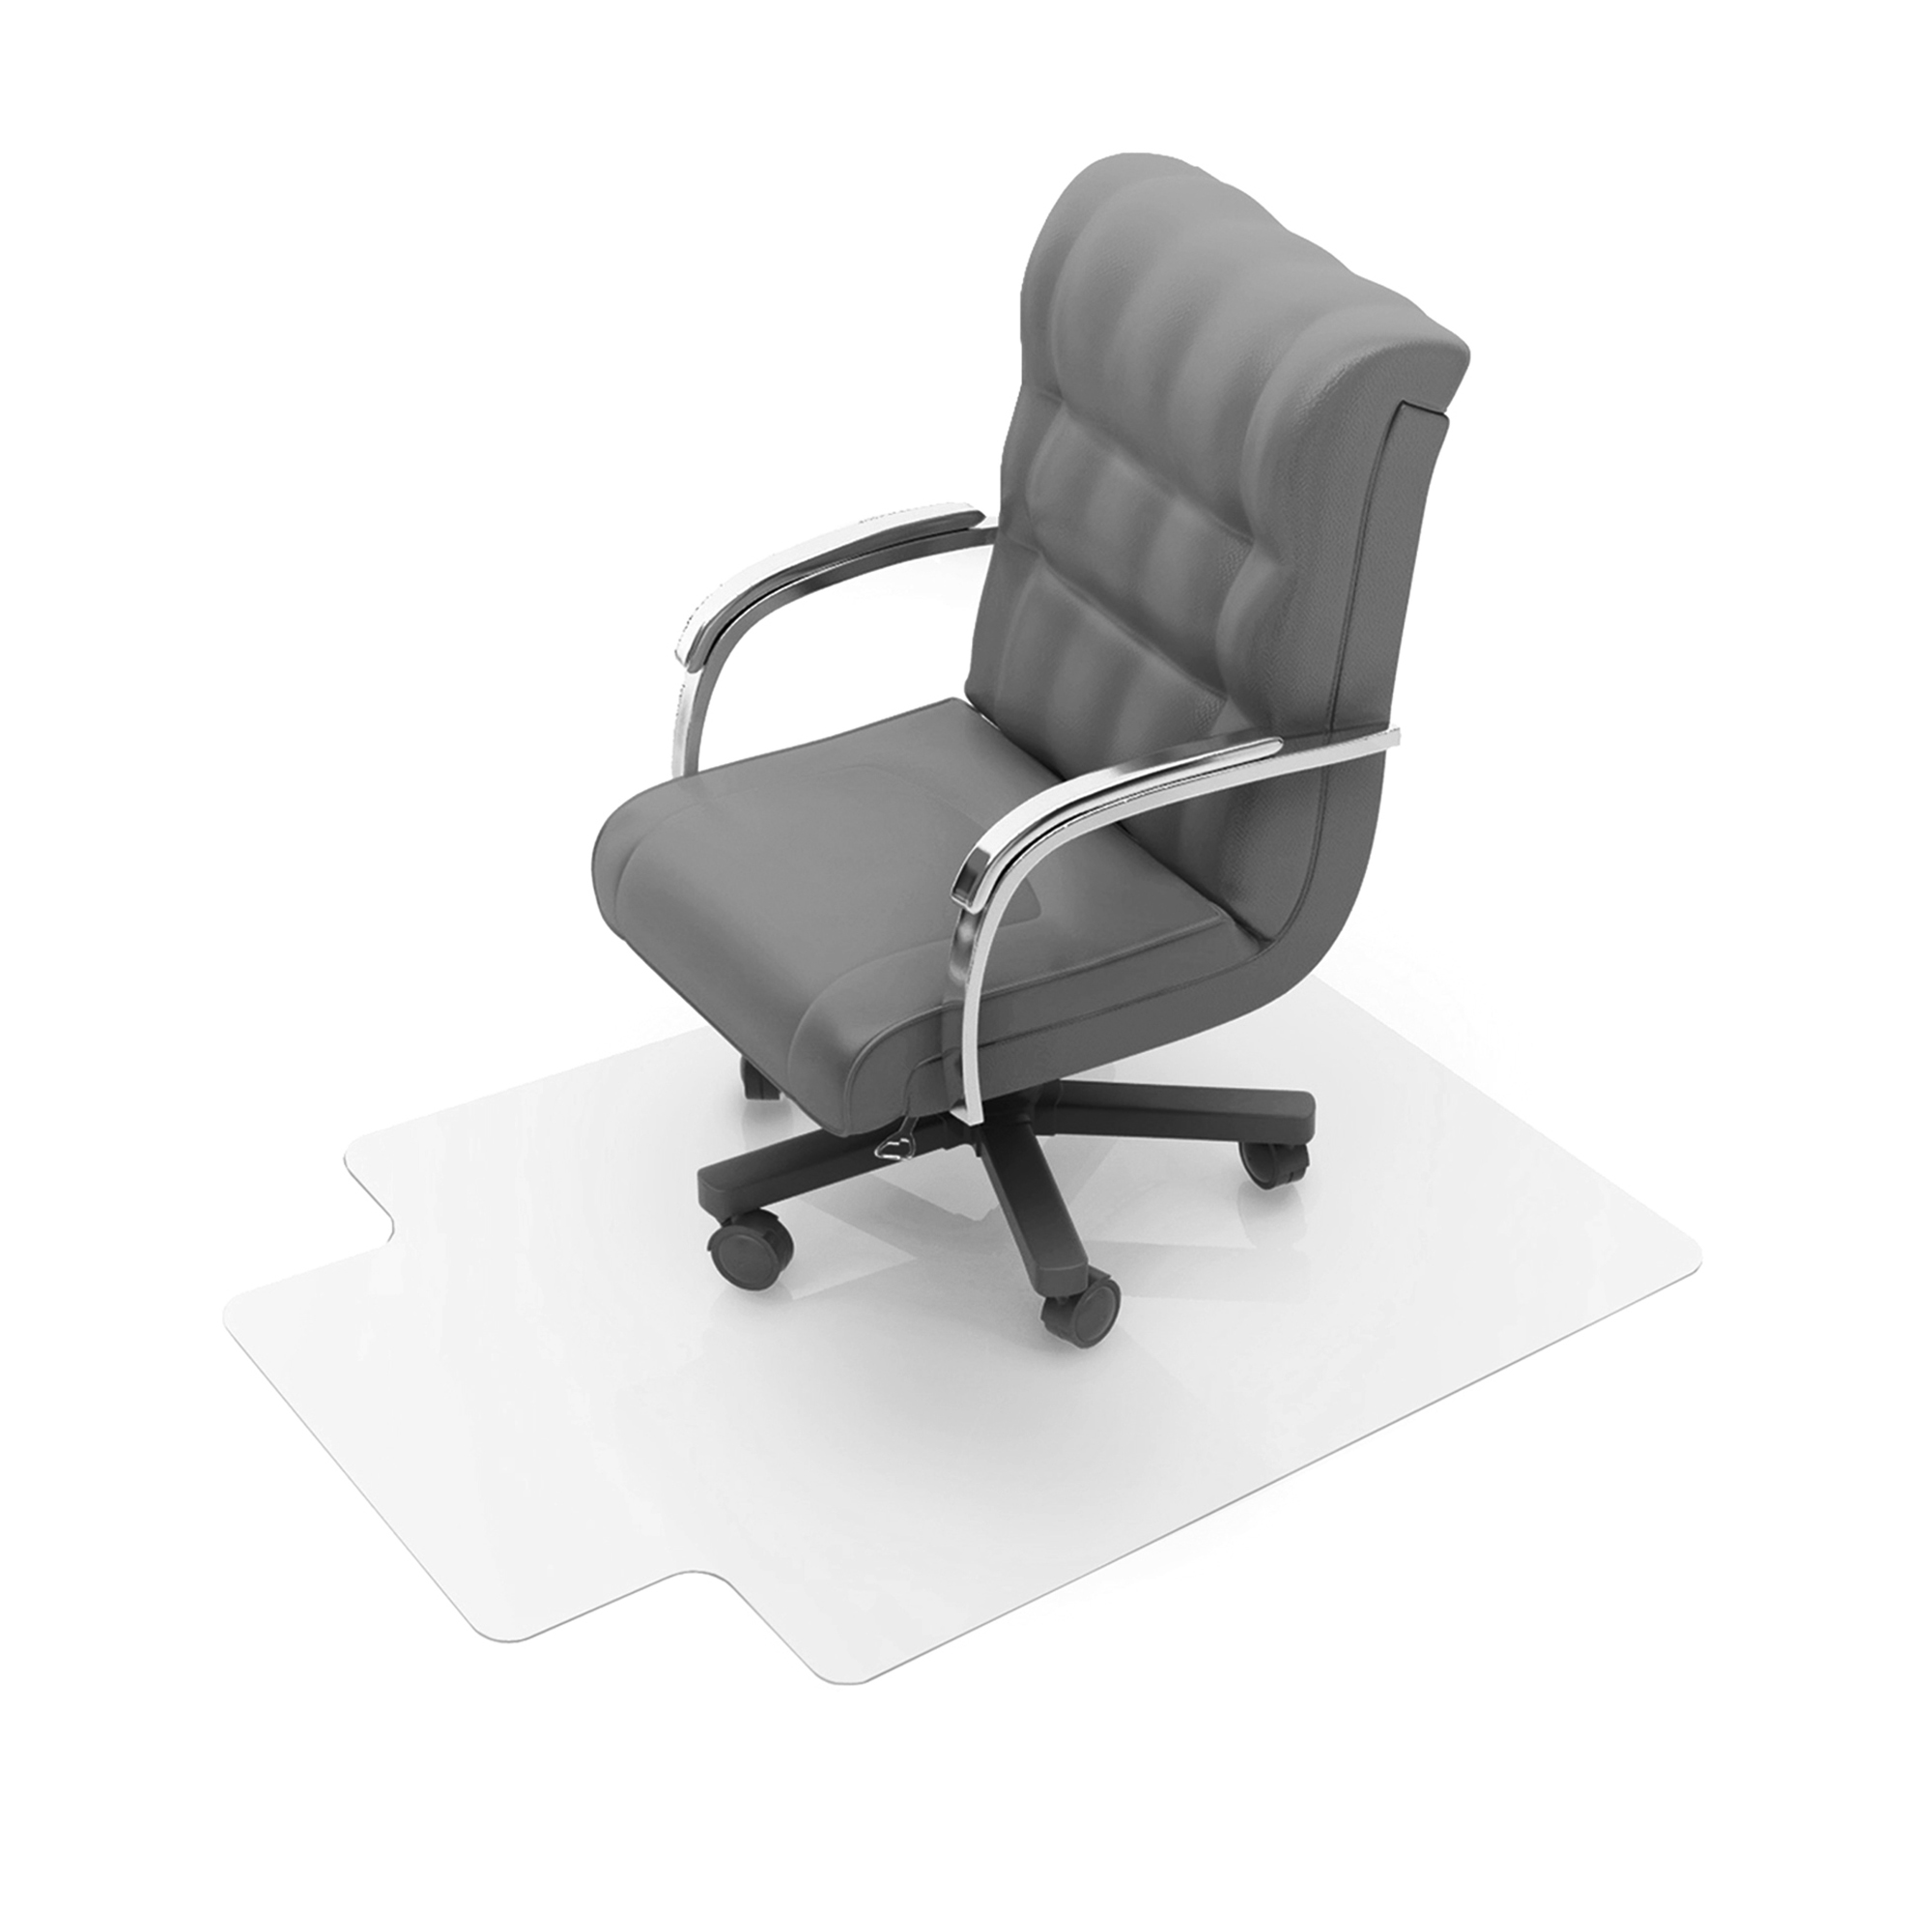 Computex® Anti-Static Vinyl Lipped Chair Mat for Carpets up to 3/8" - 36" x 48" - image 2 of 11